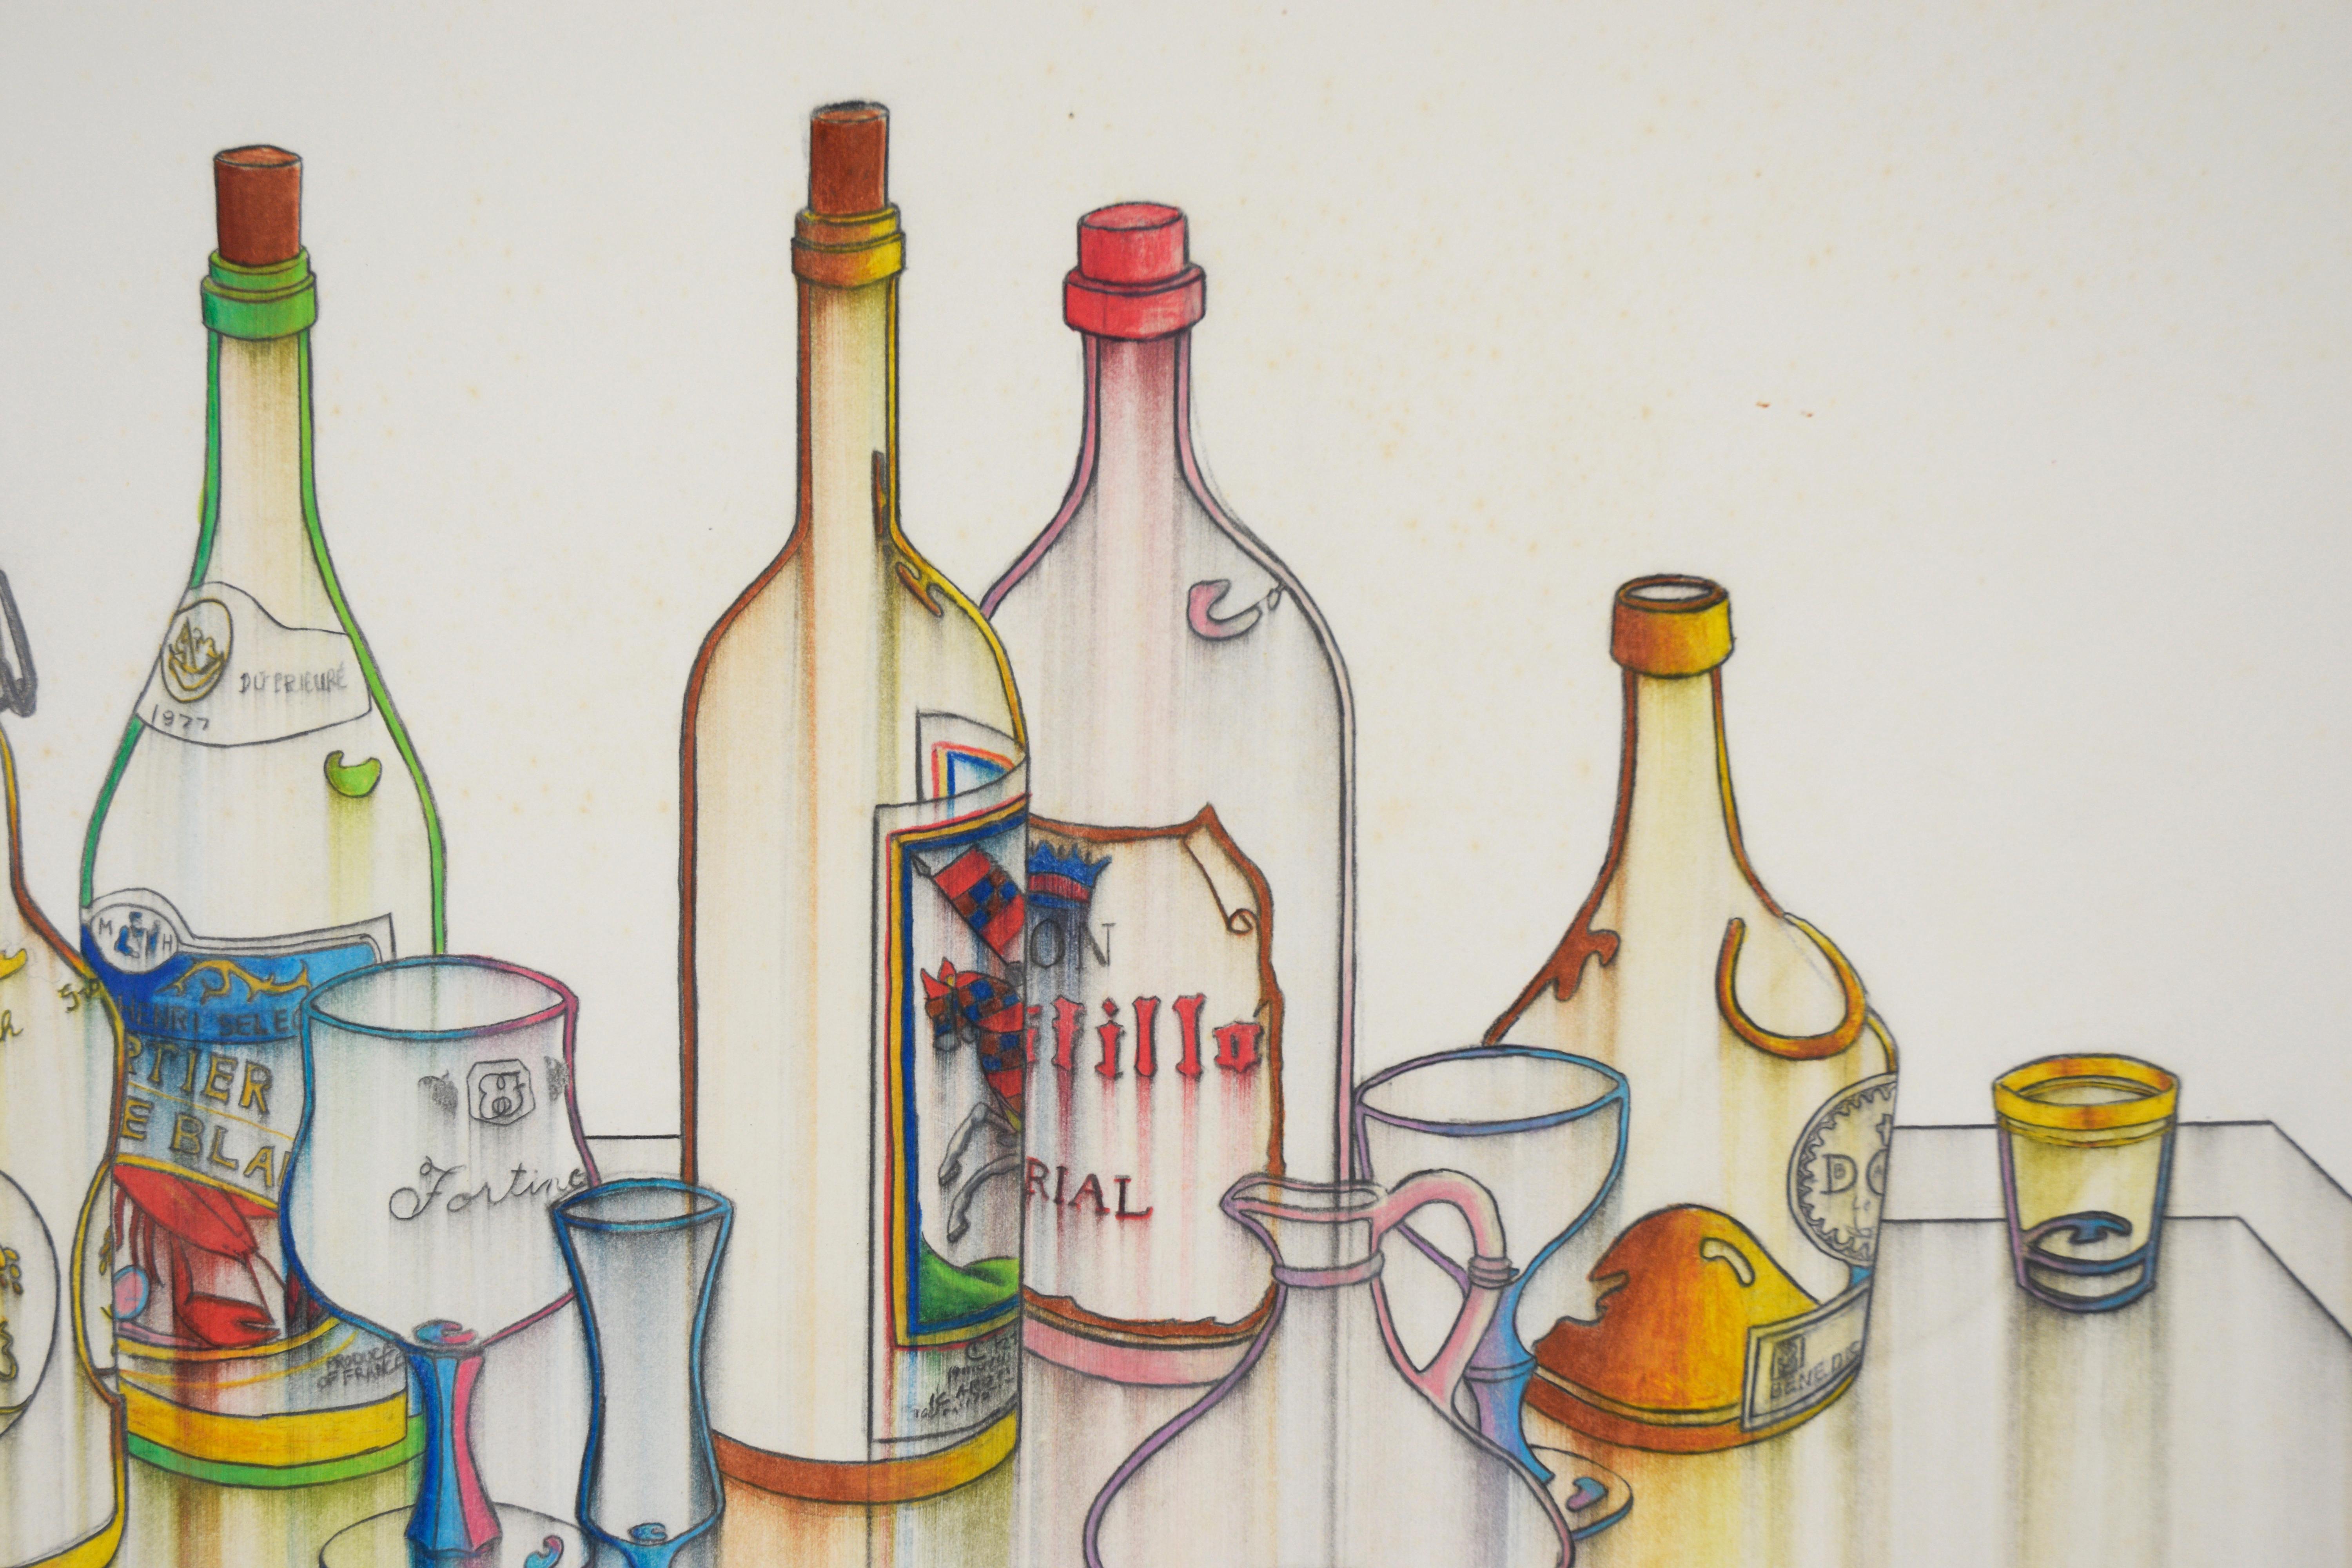 Oil Pastel and Pencil Still Life of Wine and Spirits Bottles  - American Impressionist Painting by Erin Pearce